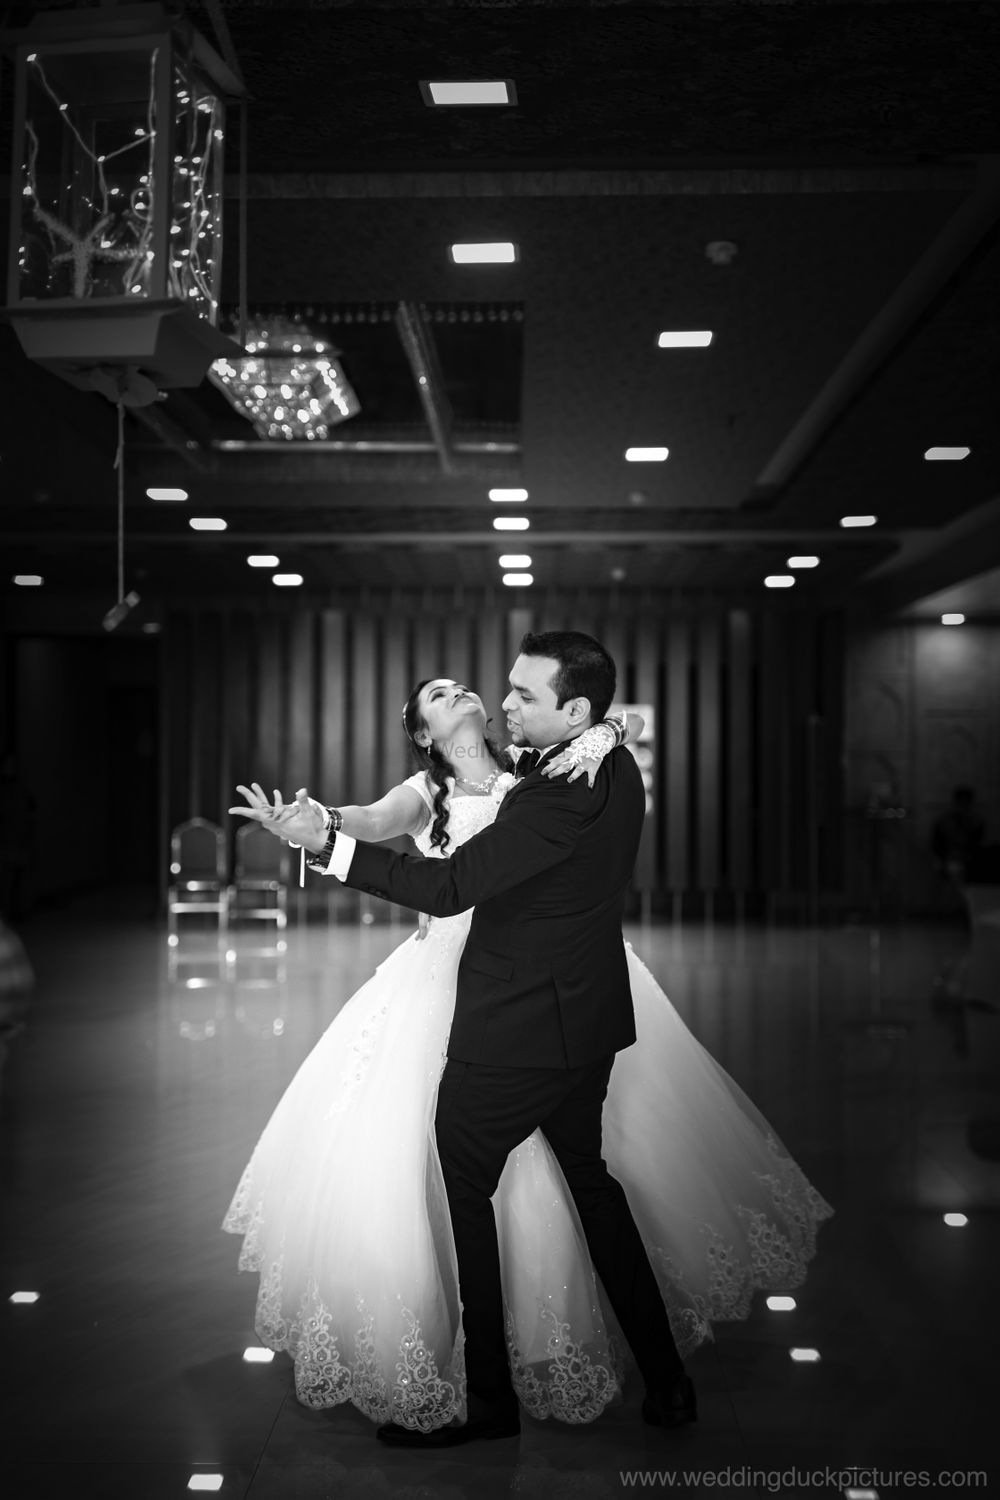 Photo From Christian Weddings - By Wedding Duck Pictures